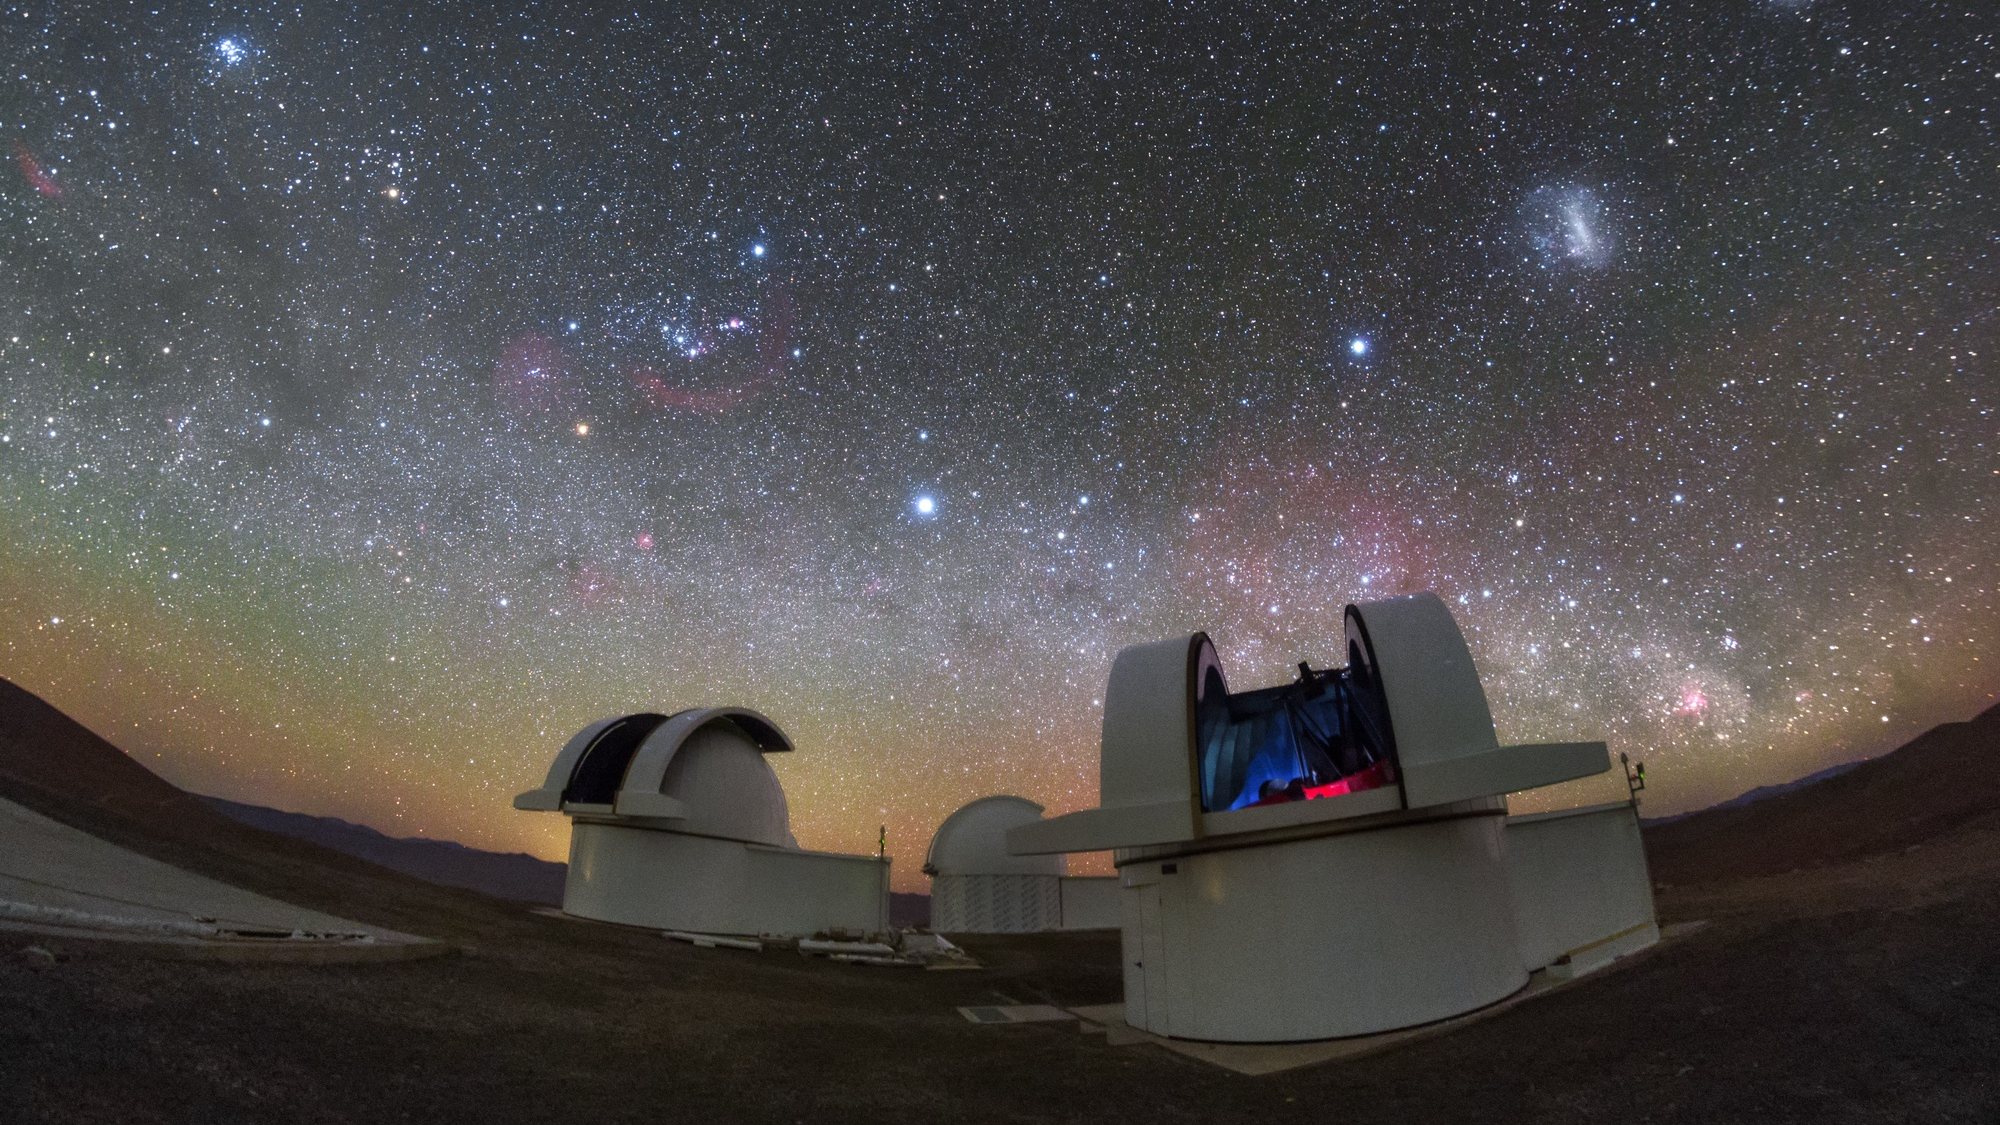 epa07210121 A handout photo made available by European Southern Observatory, ESO, on 05 December 2018 showing the telescopes of the SPECULOOS Southern Observatory gazing out into the stunning night sky over the Atacama Desert, Chile. The SSO is installed at ESO&#039;s Paranal Observatory in the vast Atacama Desert, Chile, and consists of four 1-metre planet-hunting telescopes. The project&#039;s telescopes are named after Jupiter&#039;s Galilean moons, and are neighbours of ESO&#039;s Very Large Telescope and VISTA. ESO on 05 December 2018 said the SPECULOOS project has made its first observations at the European Southern Observatory’s Paranal Observatory in northern Chile. SPECULOOS will focus on detecting Earth-sized planets orbiting nearby ultra-cool stars and brown dwarfs.  EPA/P. HORALEK / EUROPEAN SOUTHERN OBSERVATORY HANDOUT  HANDOUT EDITORIAL USE ONLY/NO SALES